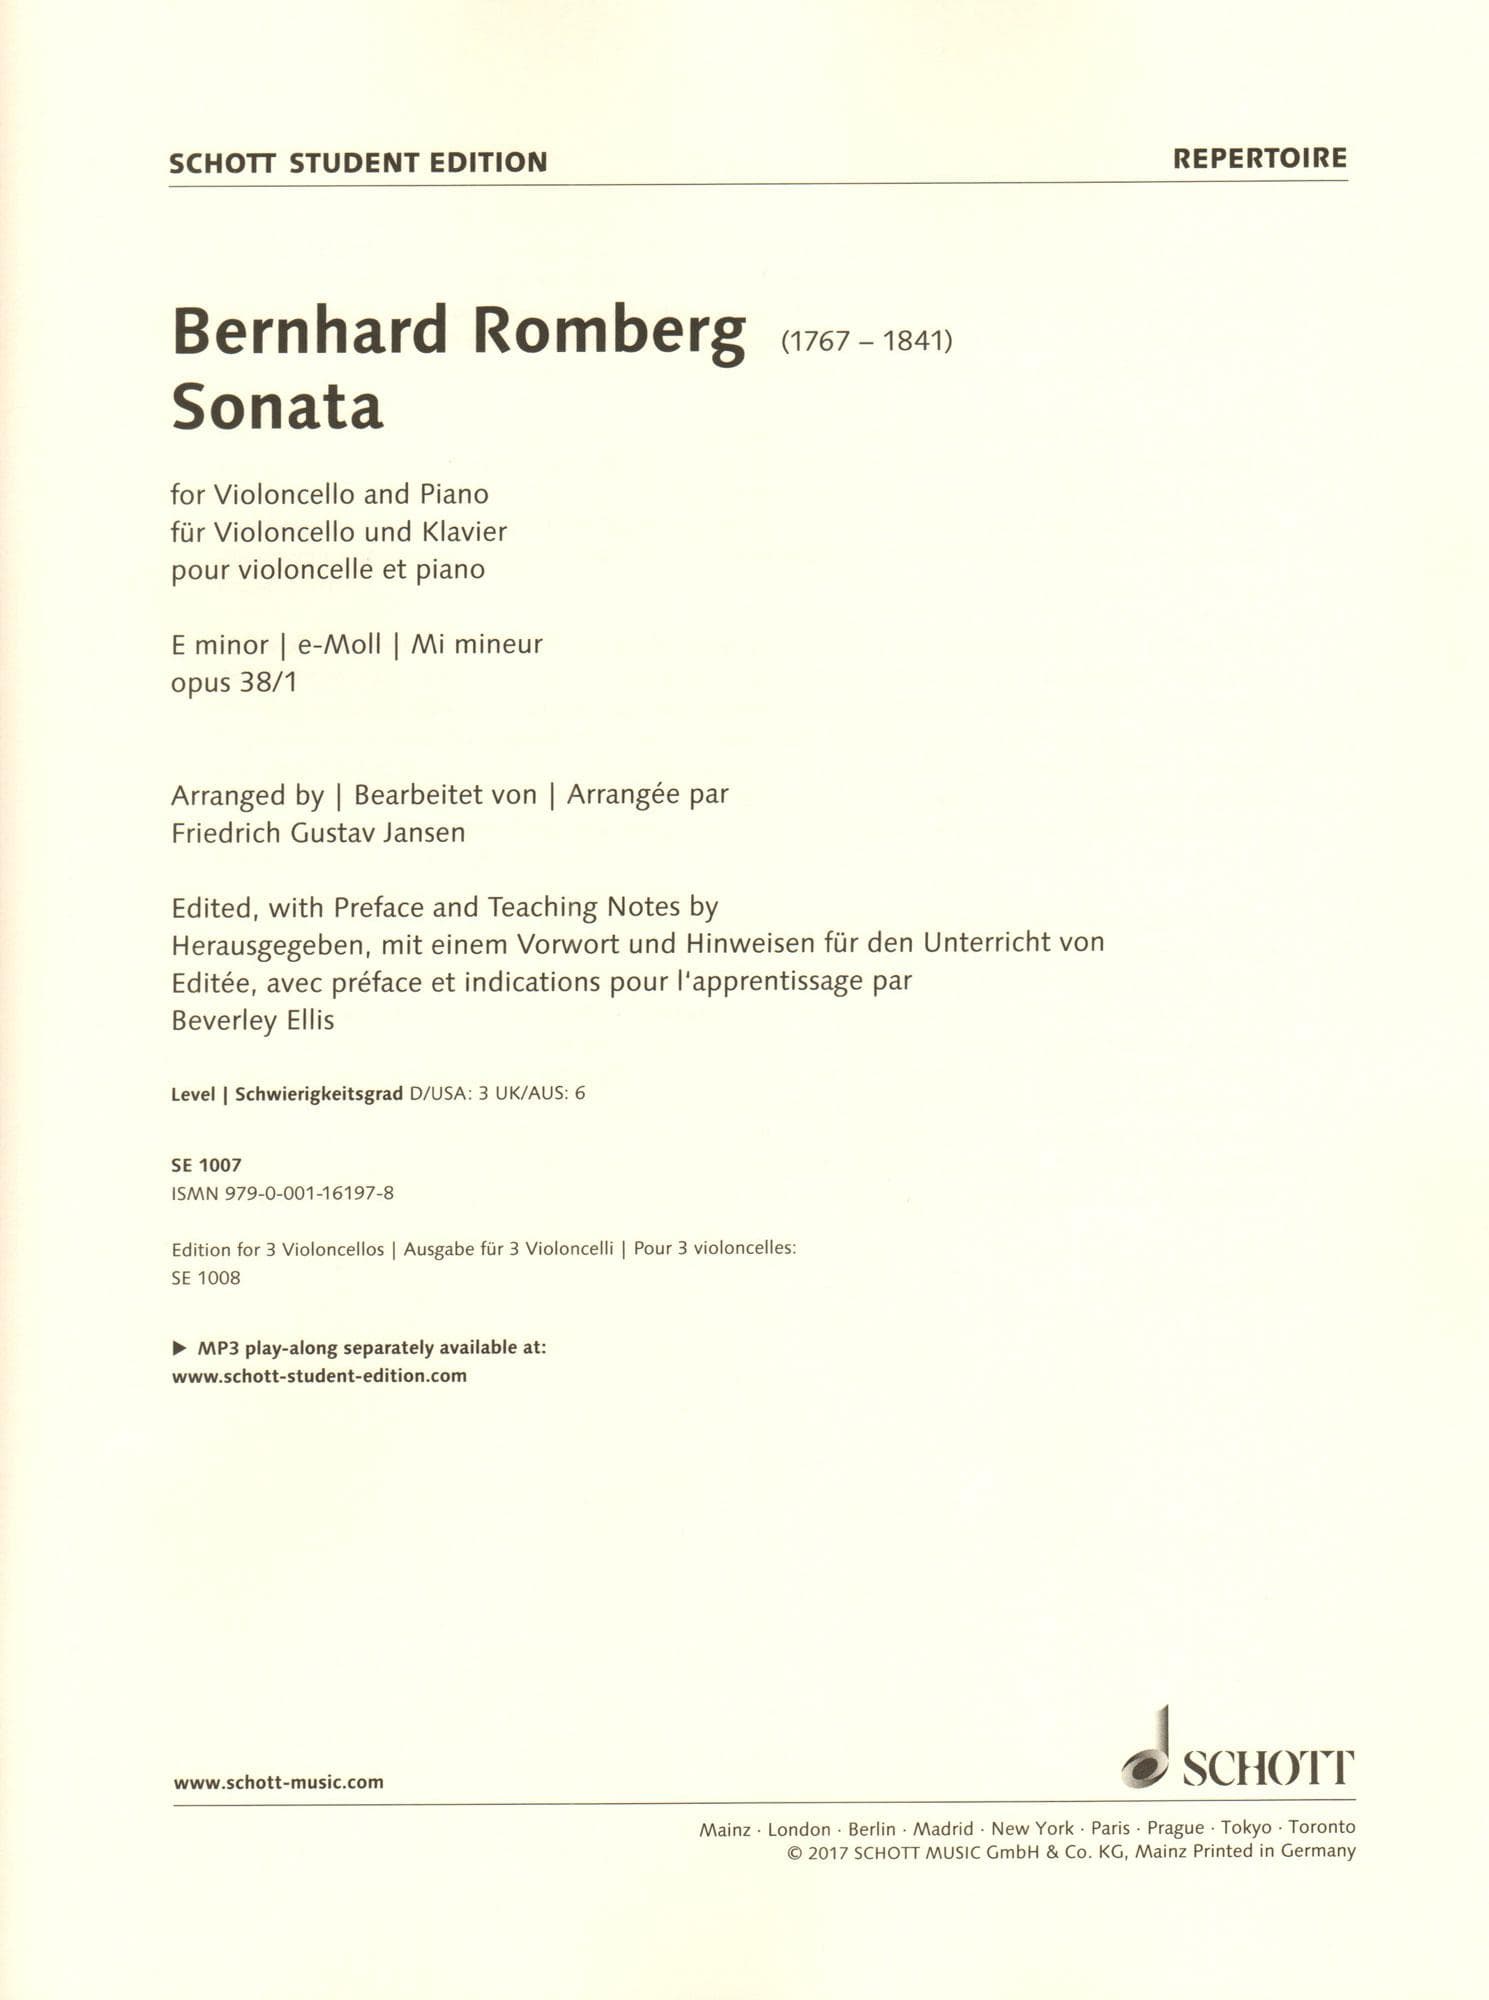 Romberg, Bernhard - Sonata in E minor, Op. 38/1 - for Cello and Piano - arranged by Jansen - edited by Ellis - Schott Student Edition